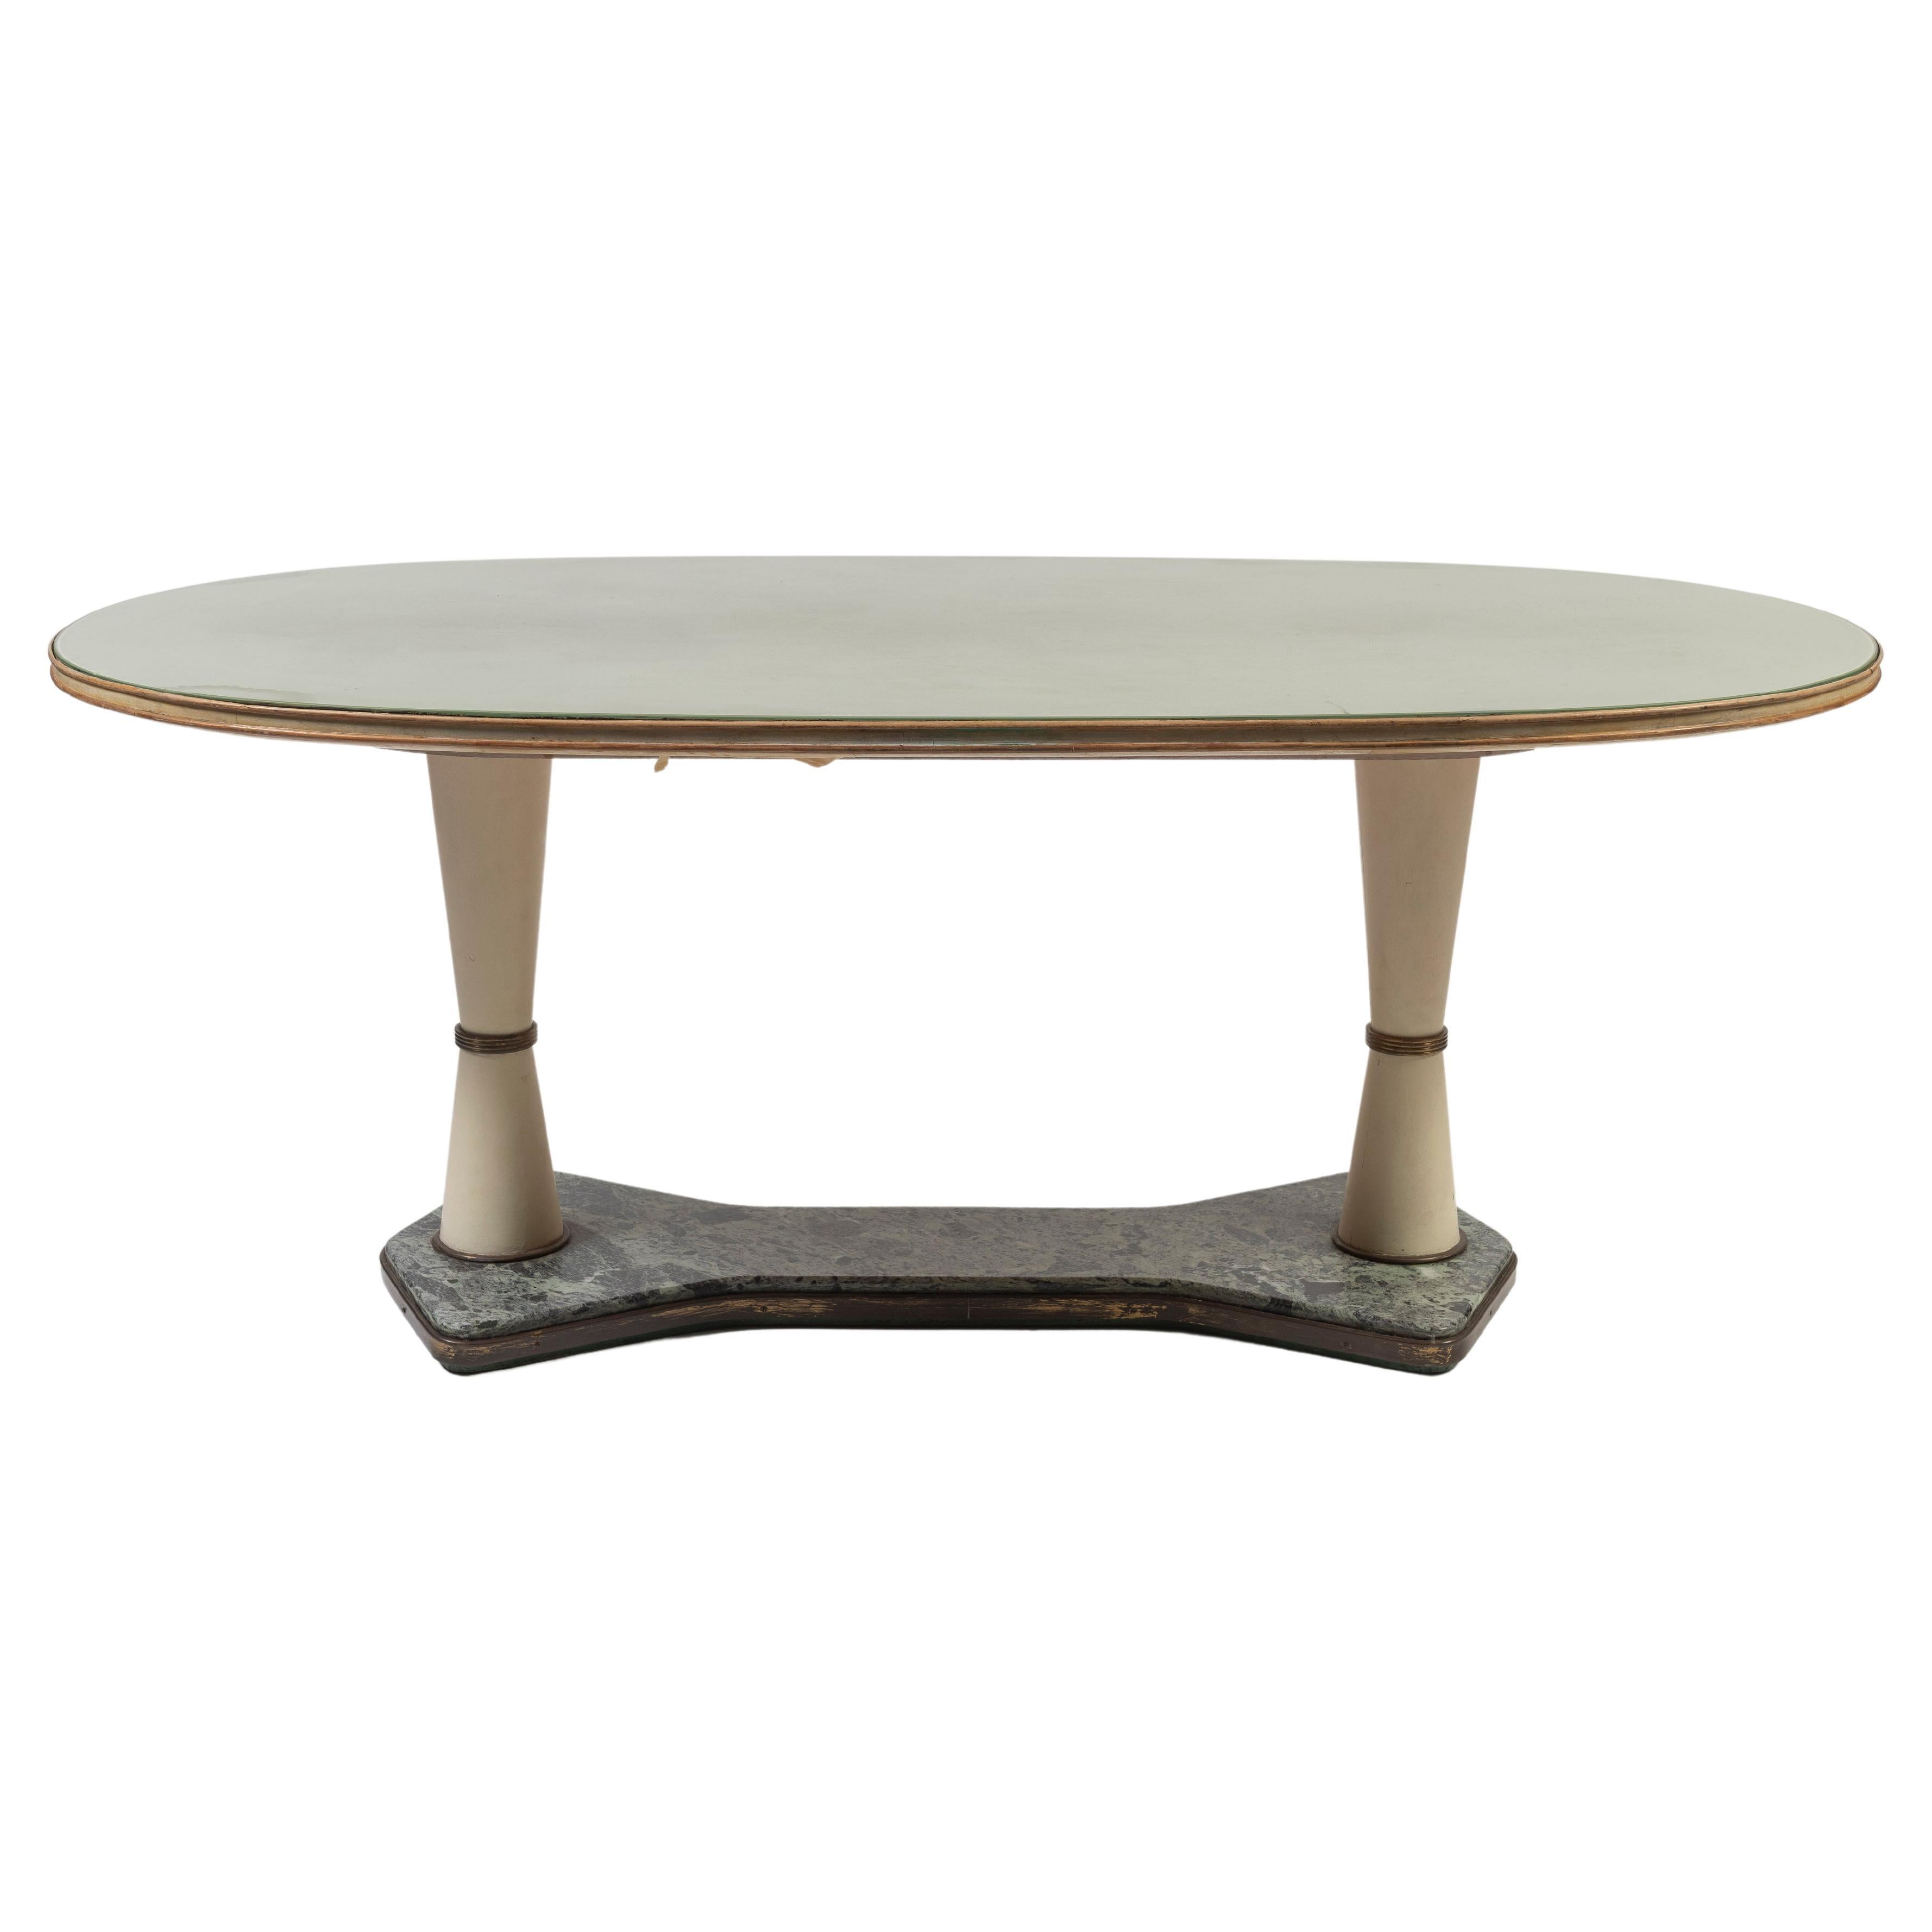 1940's Art Deco dining or center table, in the style of Vittorio Dassi, is made in two pieces, and composed of a green marble and metal base, painted wooden legs and an oval reverse-painted top in glass, banded in wood. The elegant and symmetrical